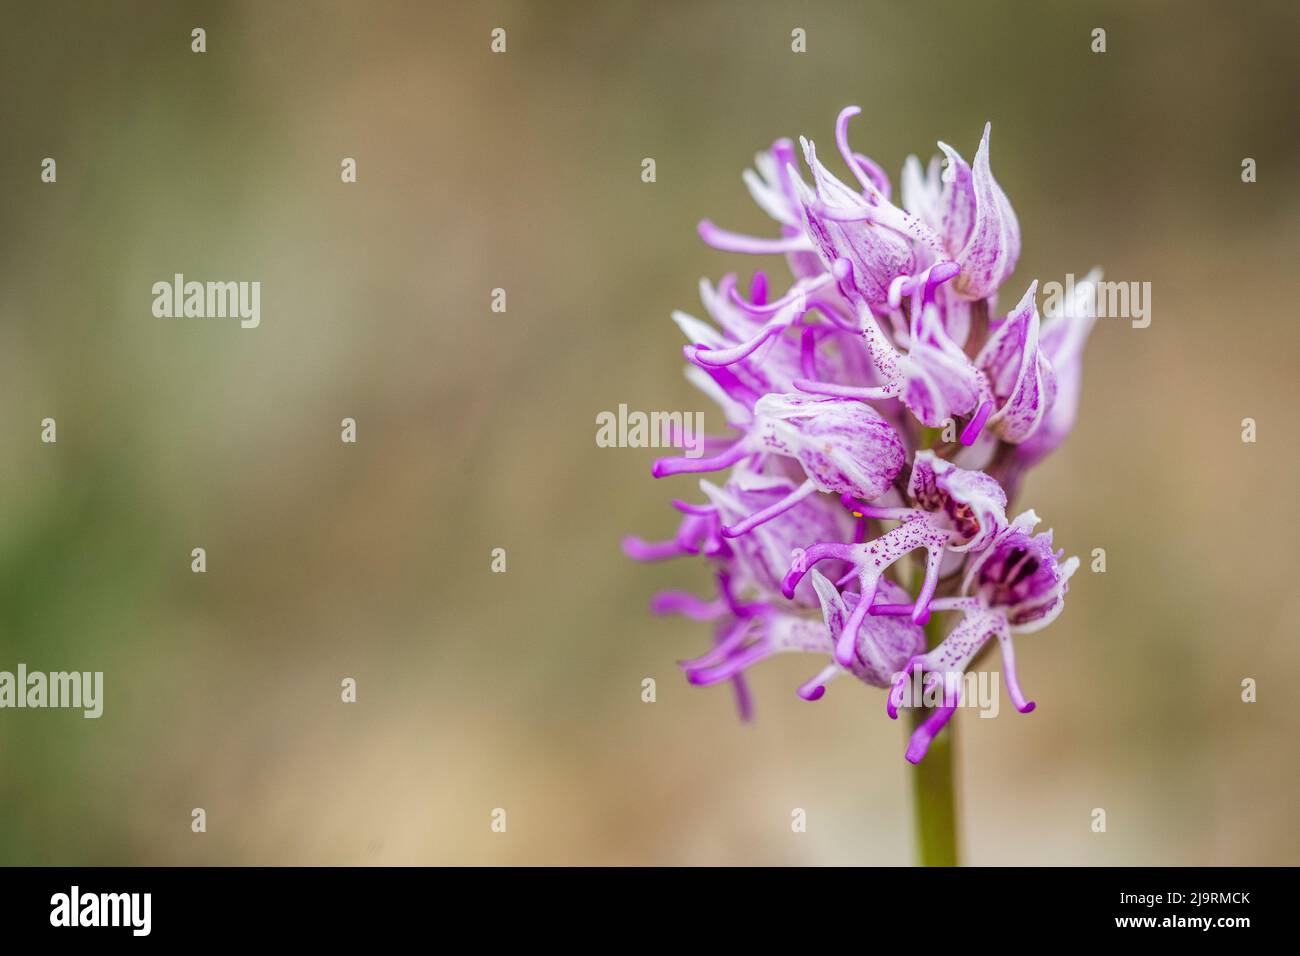 Orchis simia, commonly known as the monkey orchid, is a greyish pink to reddish species of the genus Orchis. Stock Photo